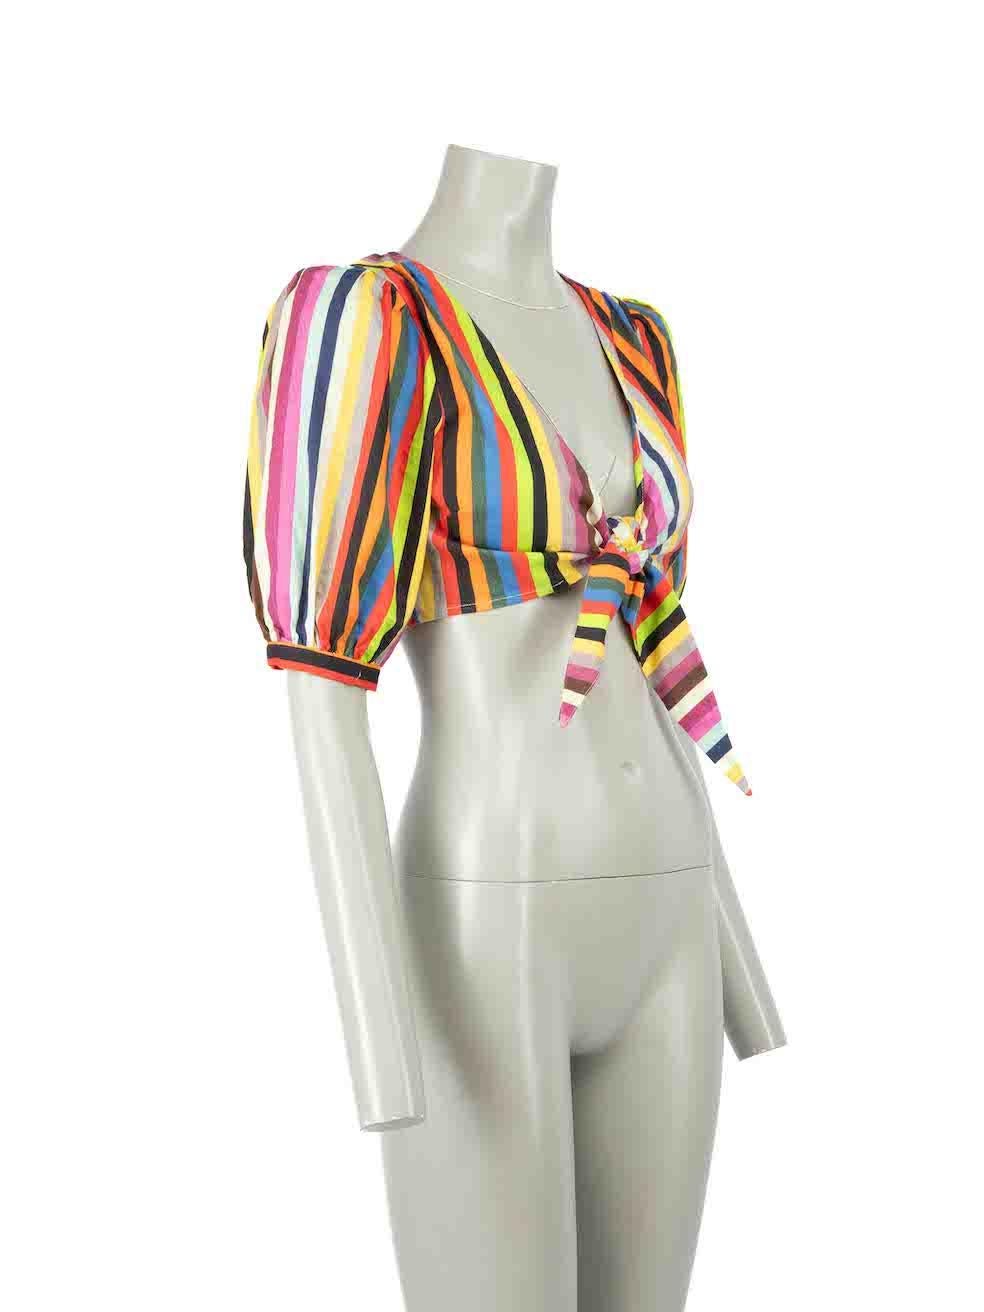 CONDITION is Never worn, with tags. No major visible wear to top is evident however very light pilling can be seen on this new LPA designer resale item.
 
 Details
 Striped Puff Sleeve Tie Front Linen Blend Crop Top
 Multicolor
 Crop fit
 Puffy